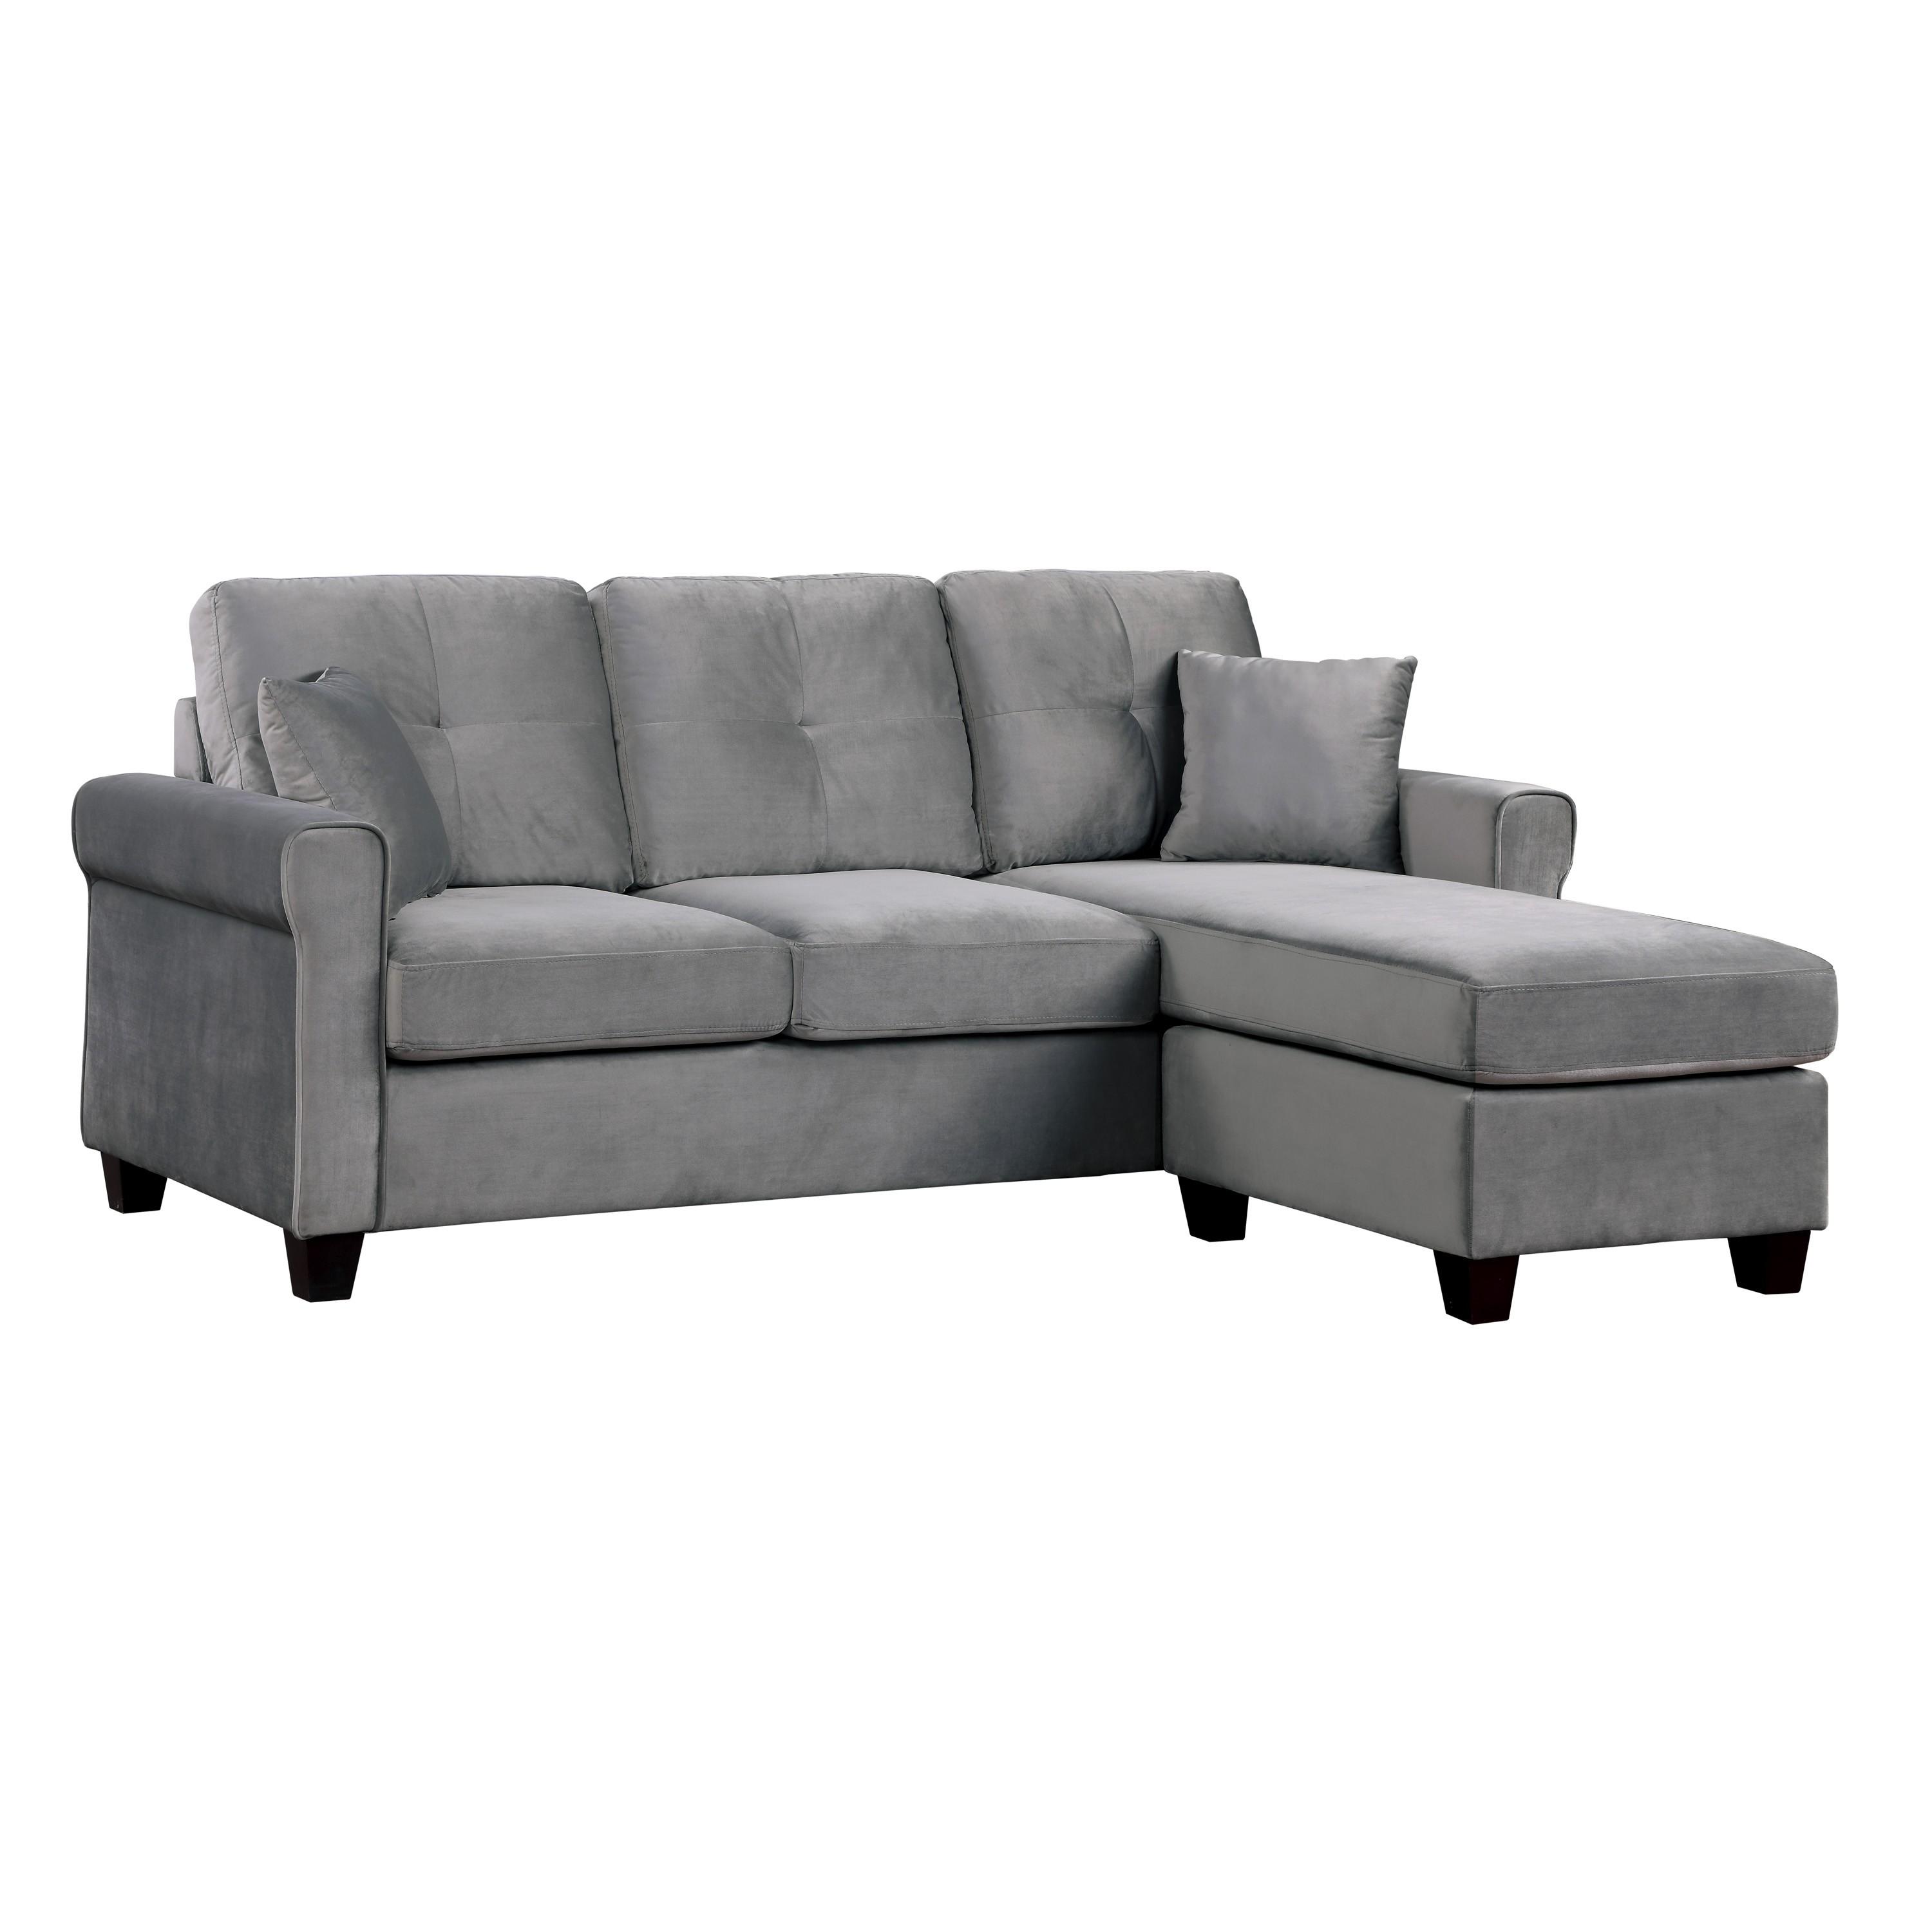 

    
Homelegance 9411GY-3SC Monty Sofa Chaise Gray 9411GY-3SC
